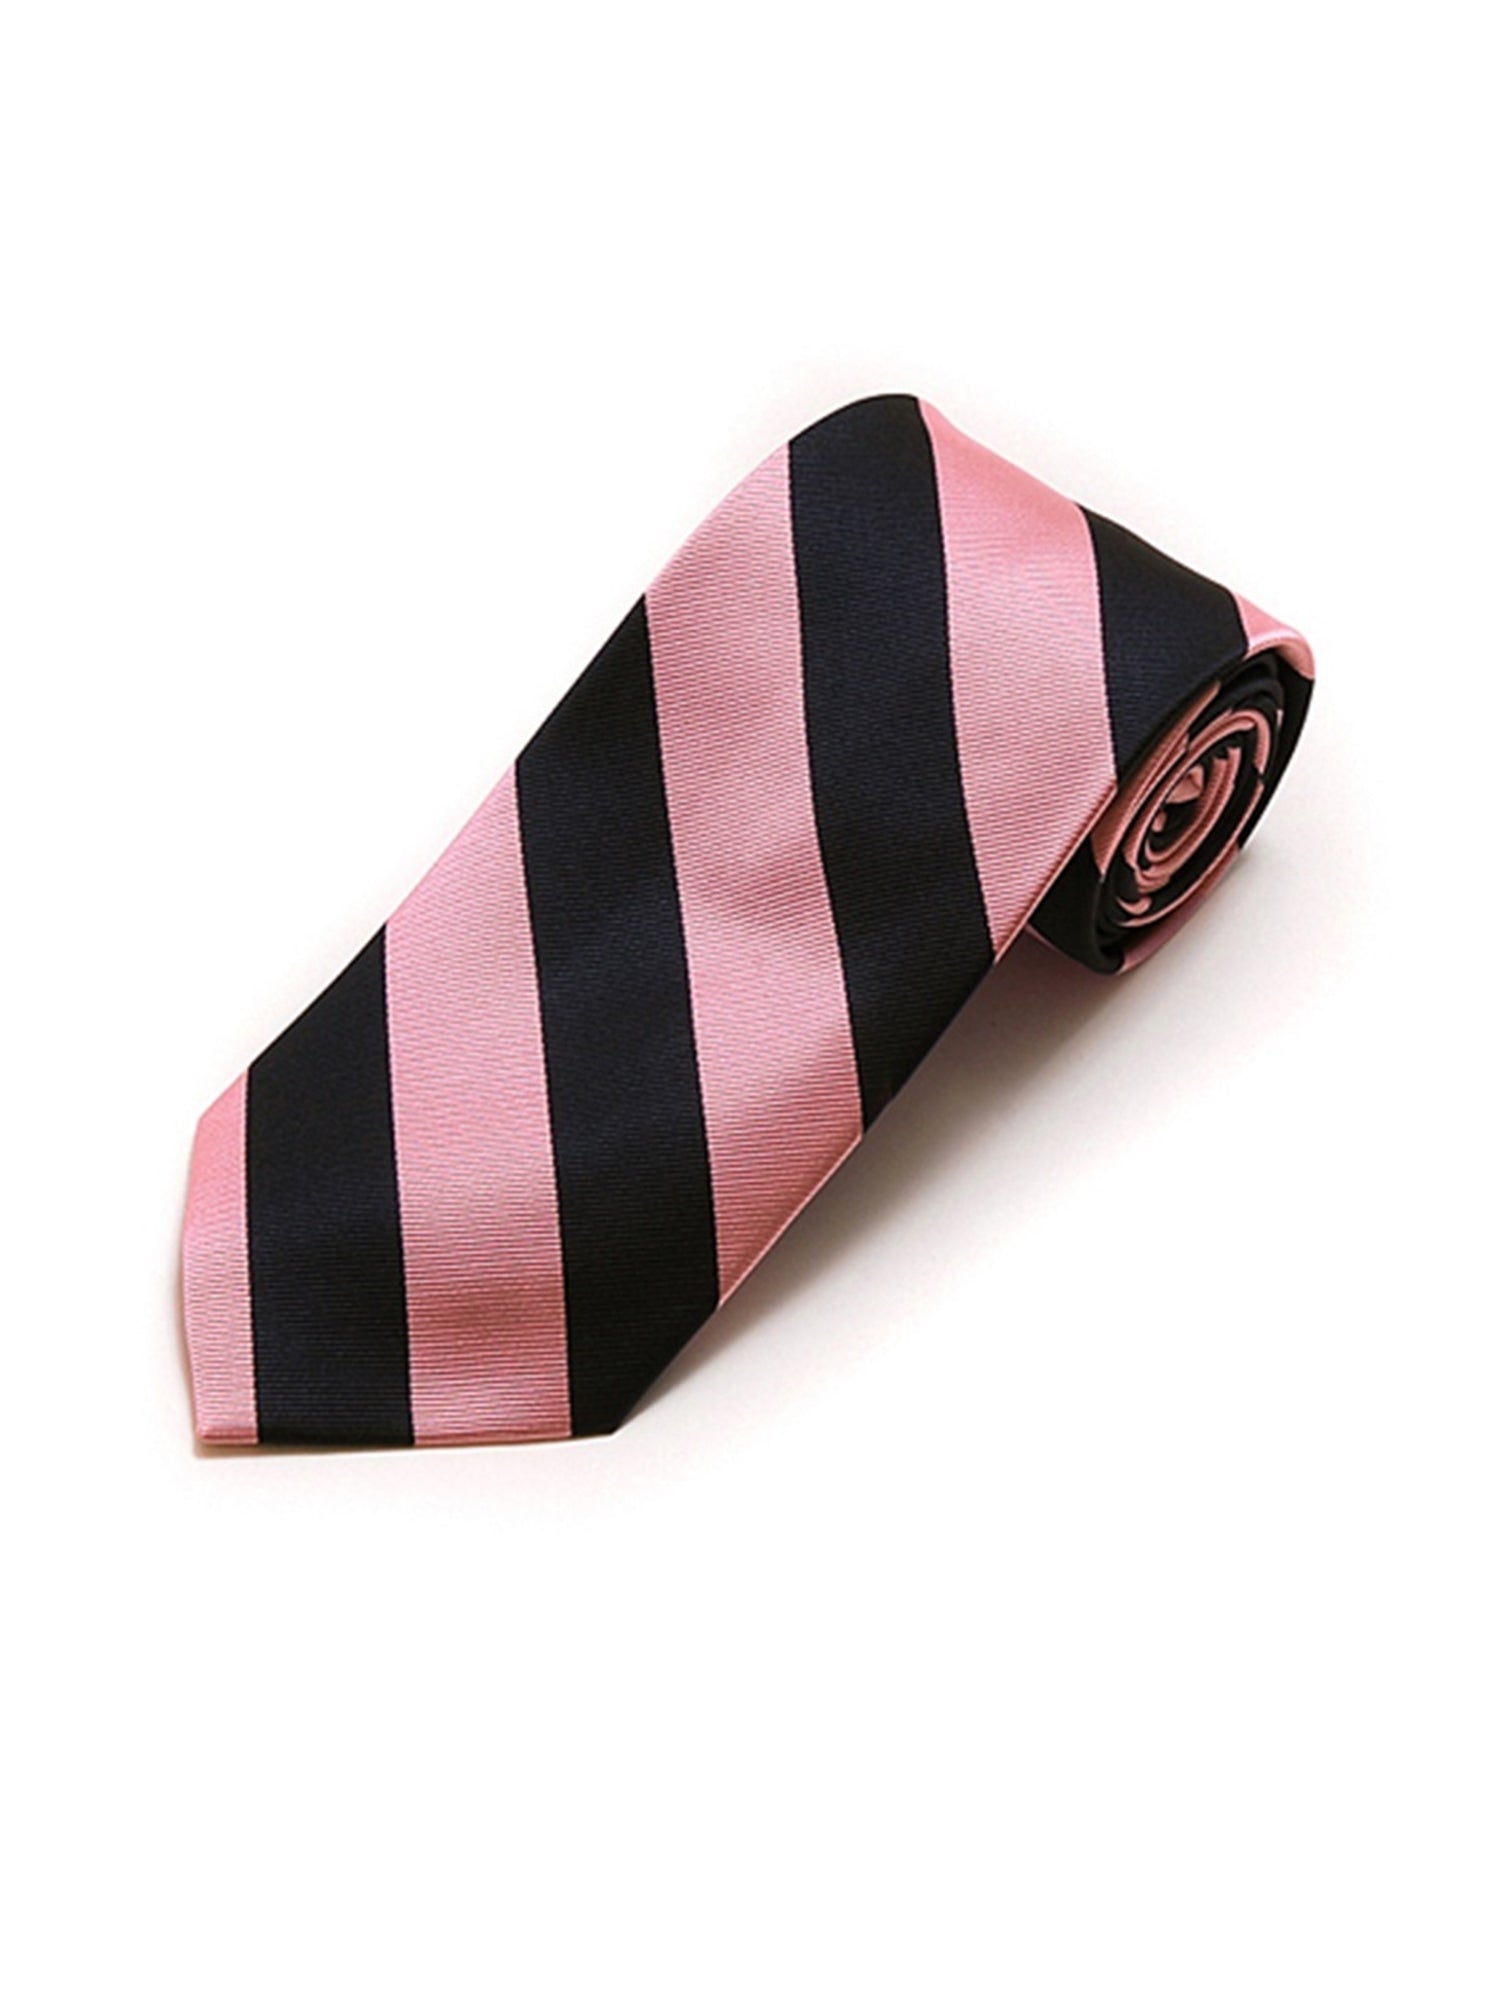 Men's College Striped Colored Silk Long Or X-Long Neck Tie Neck Tie TheDapperTie Pink & Black 57" long & 3.25" wide 